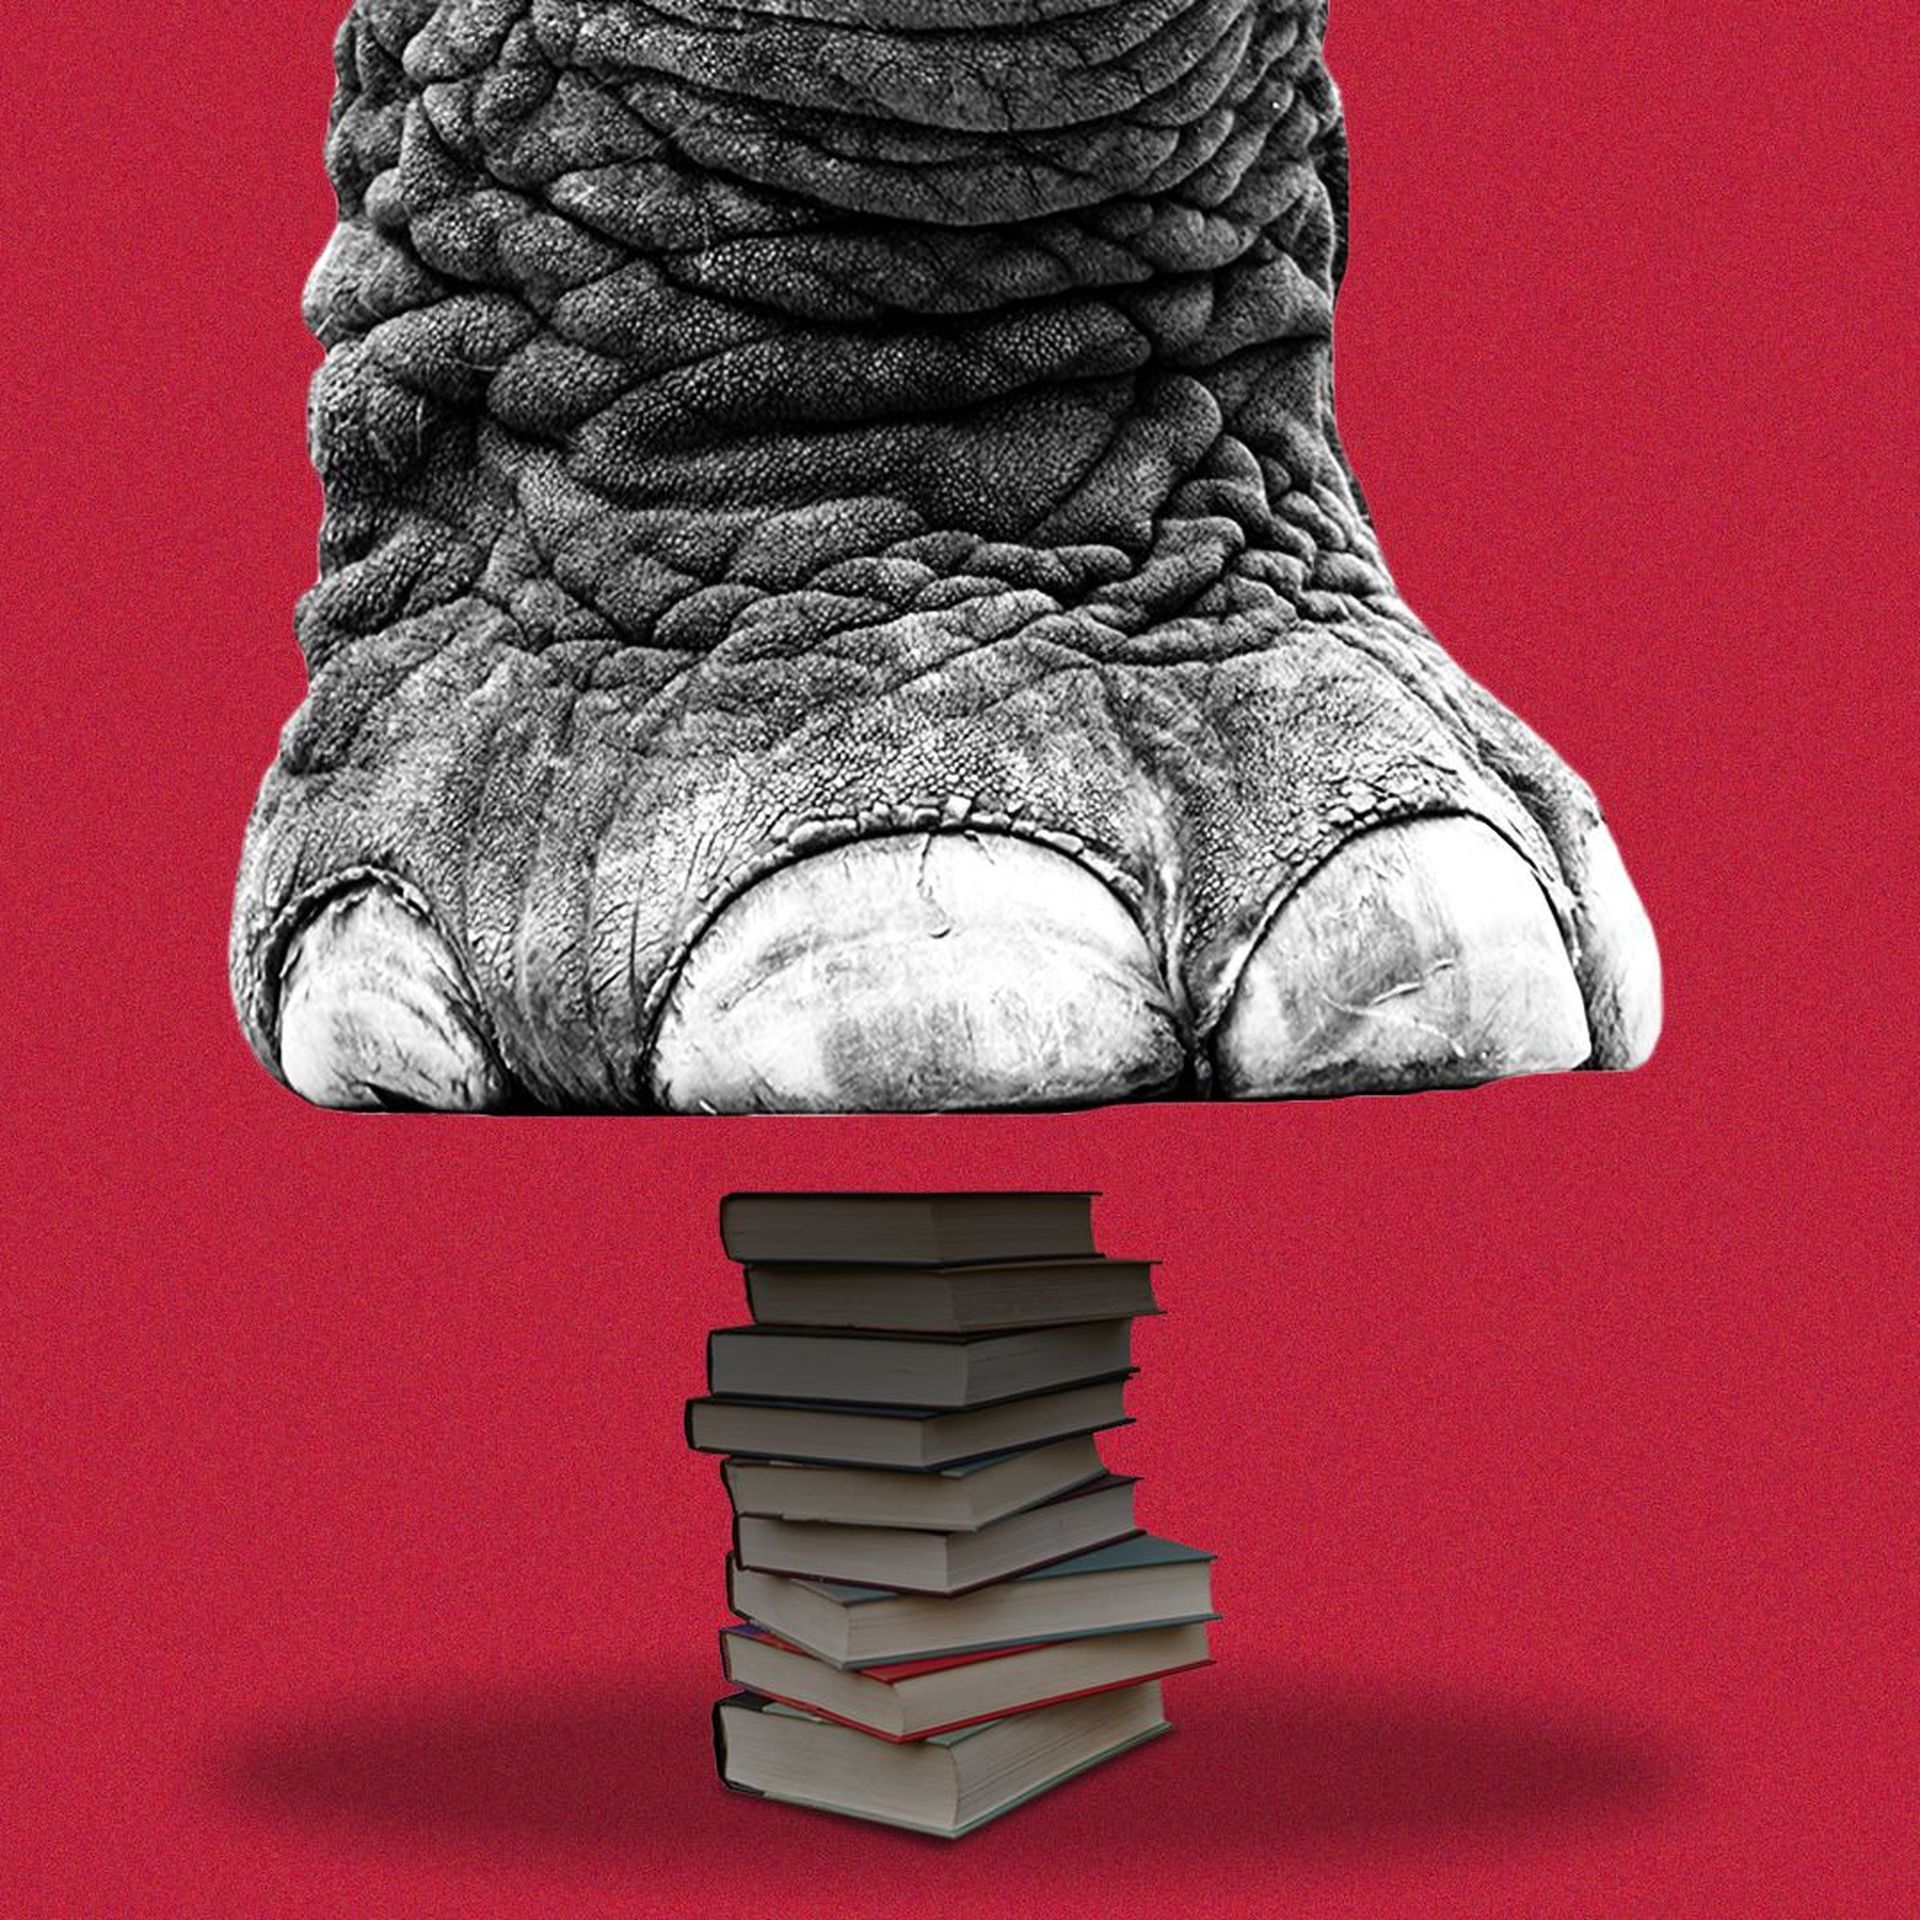 An elephant foot appears to be stepping on a stack of textbooks.